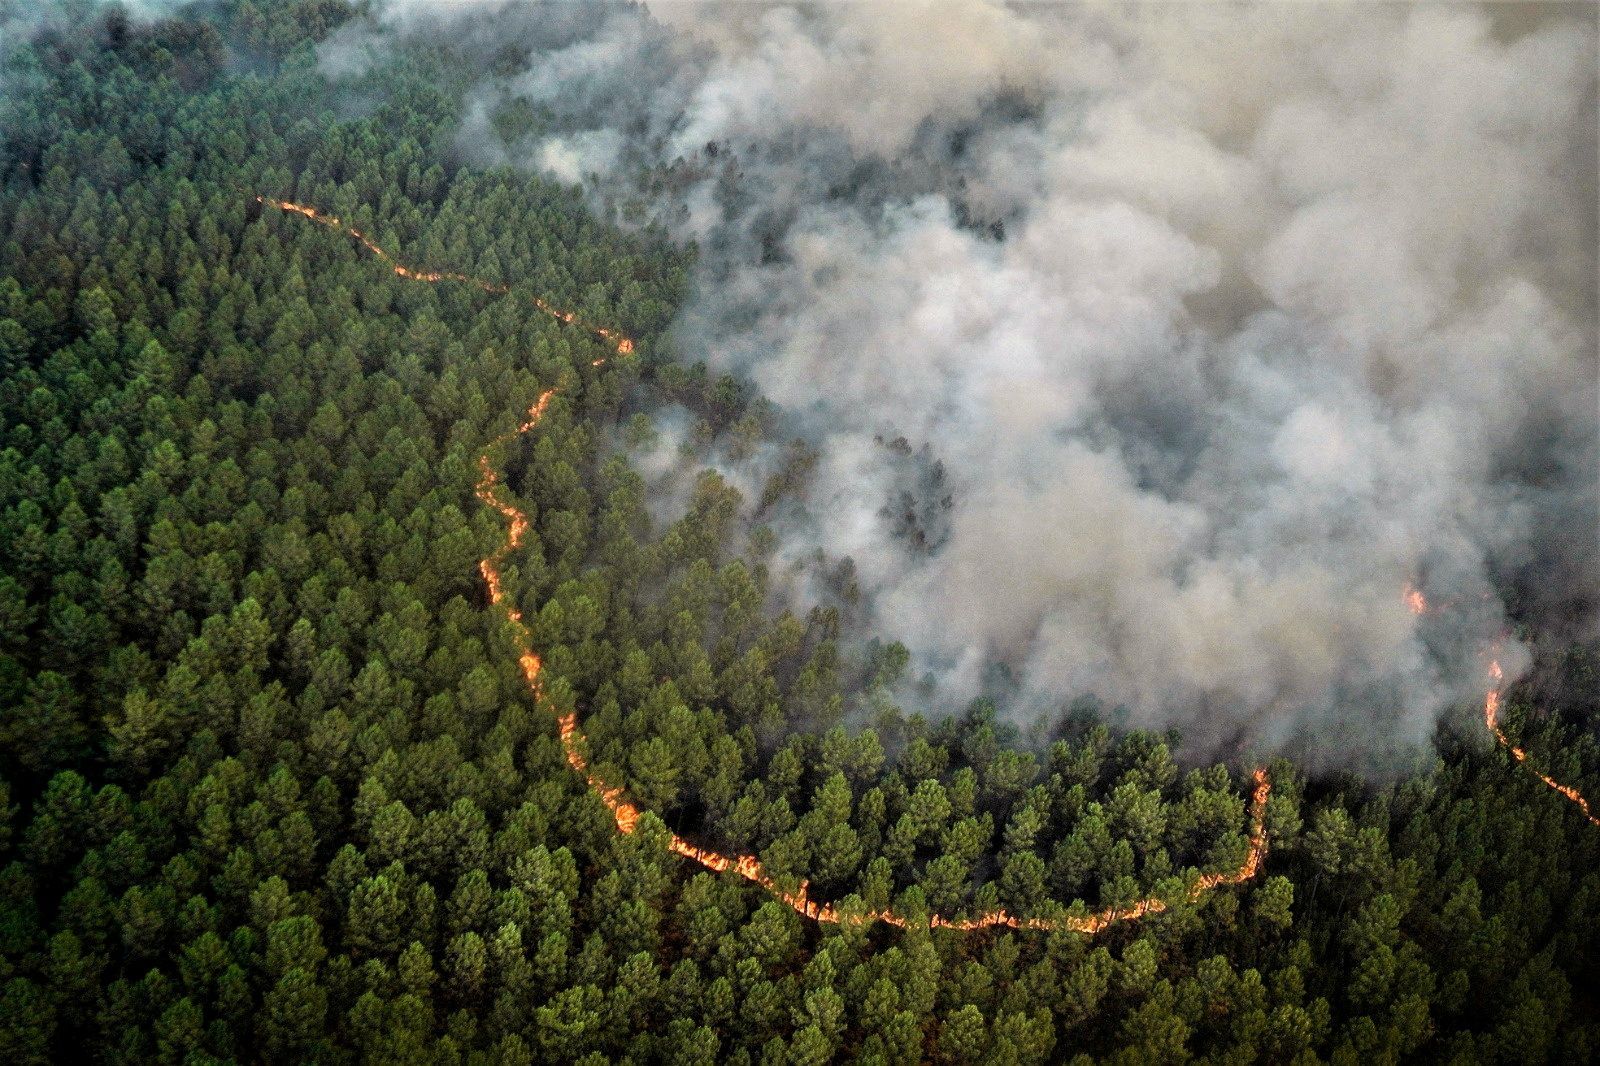 Aerial view of a wildfire burning, near Hostens, as wildfires continue to spread in the Gironde region of southwestern France on 12 August 2022. Photo: SDIS 33 / REUTERS